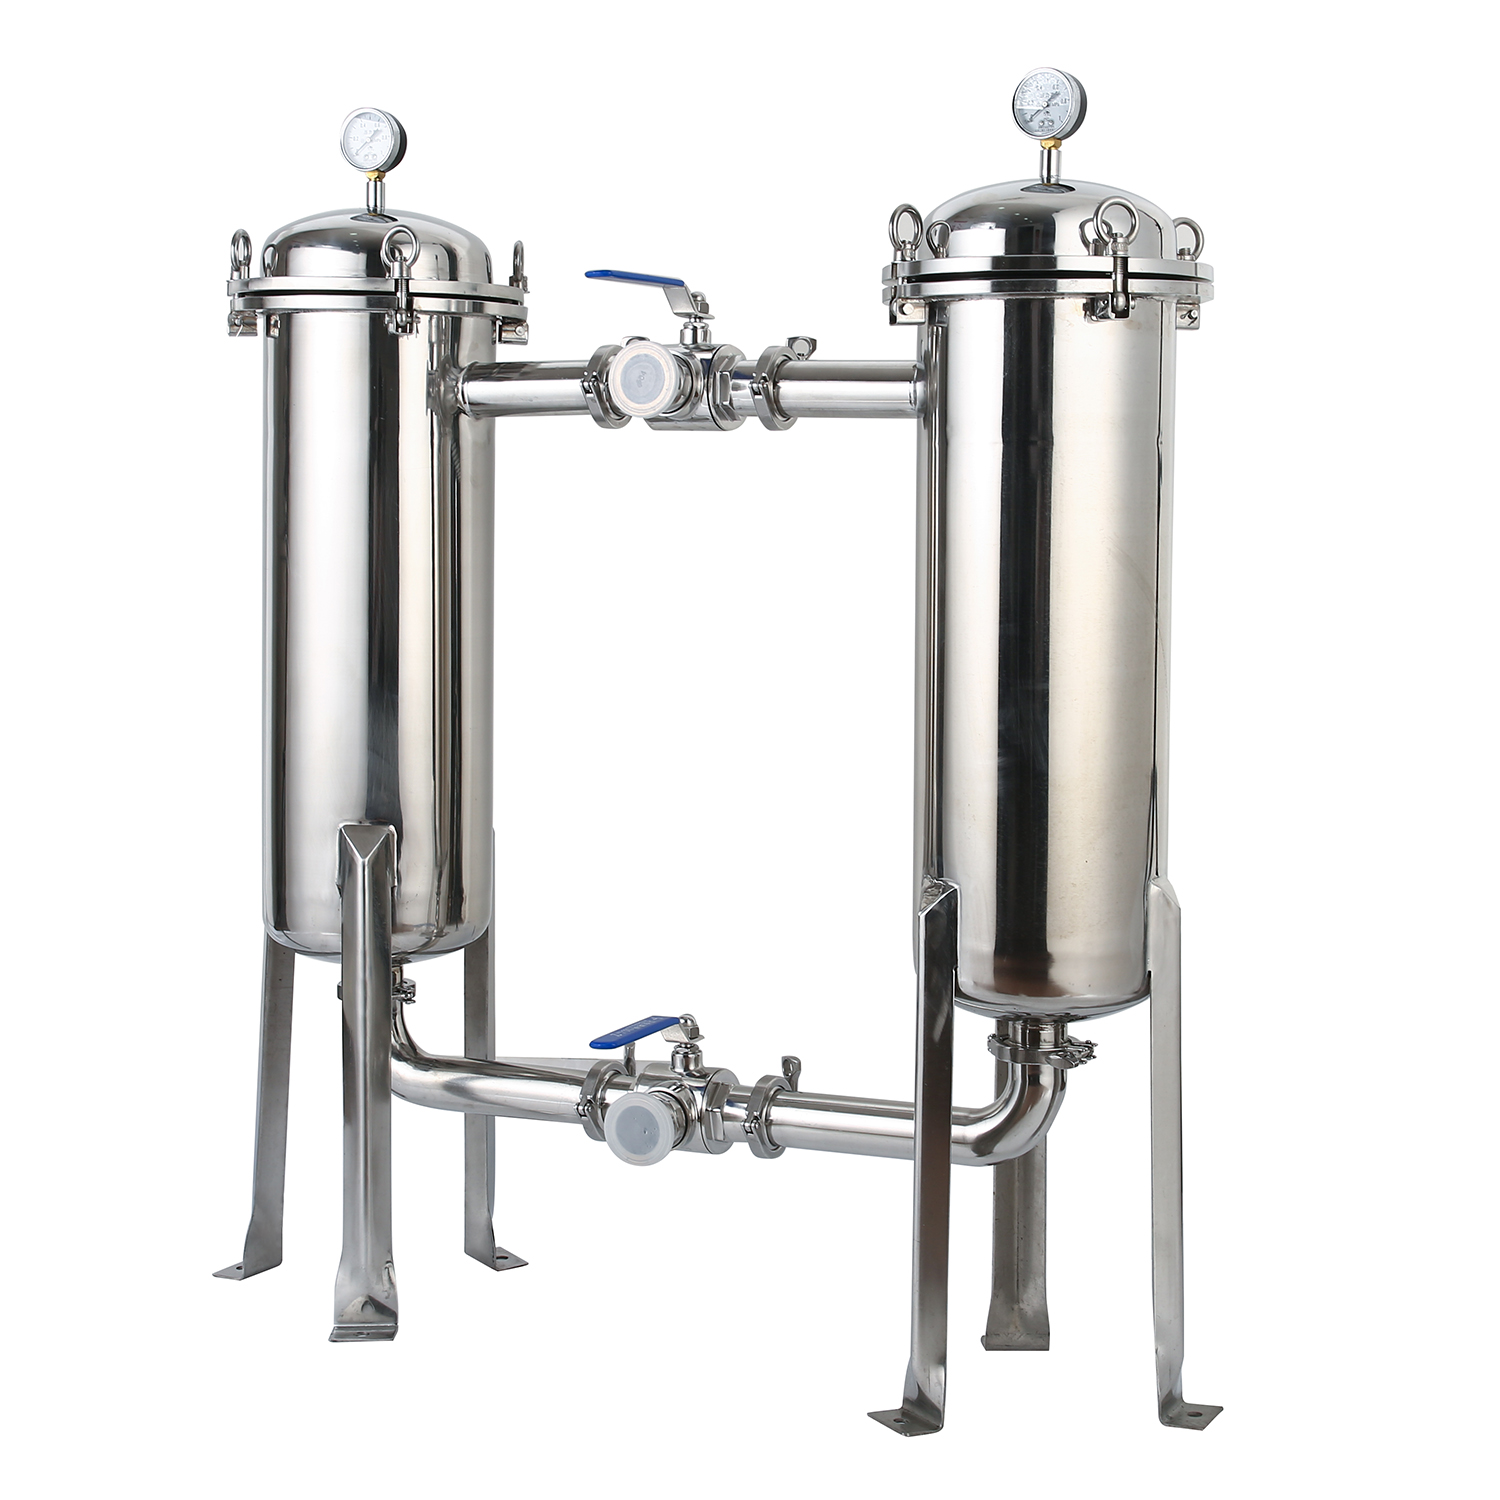 SS304 SS316L Sanitary Stainless Steel Duplex Bag Filter for Liquid Juice Beer Wine Milk Purification System